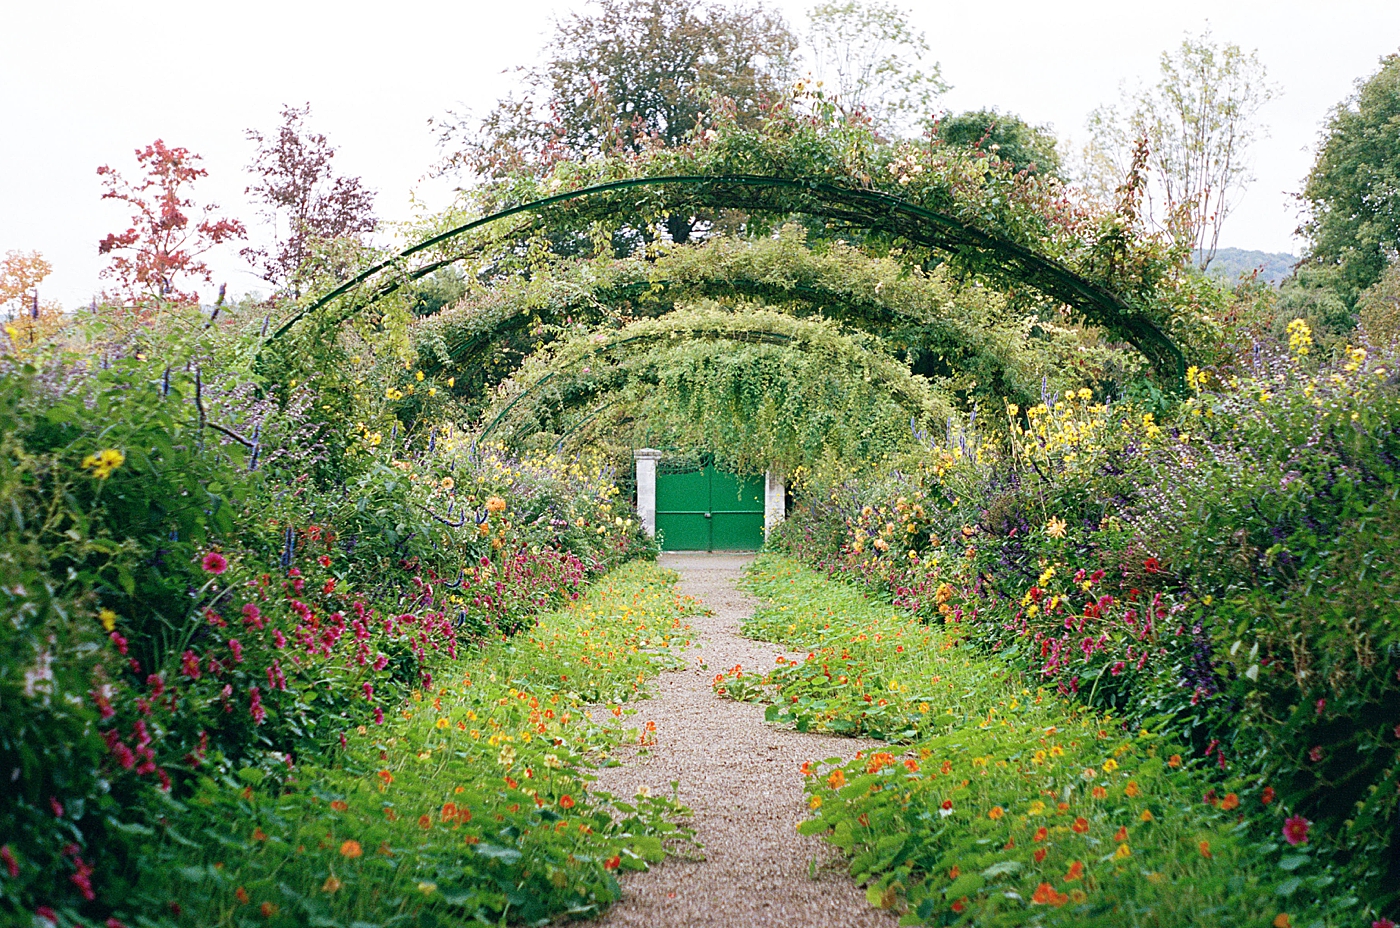 View down the walkway of a garden with greenery and flowers growing on multiple arches overhead during a trip with France Wedding Photographer Hope Helmuth Photography